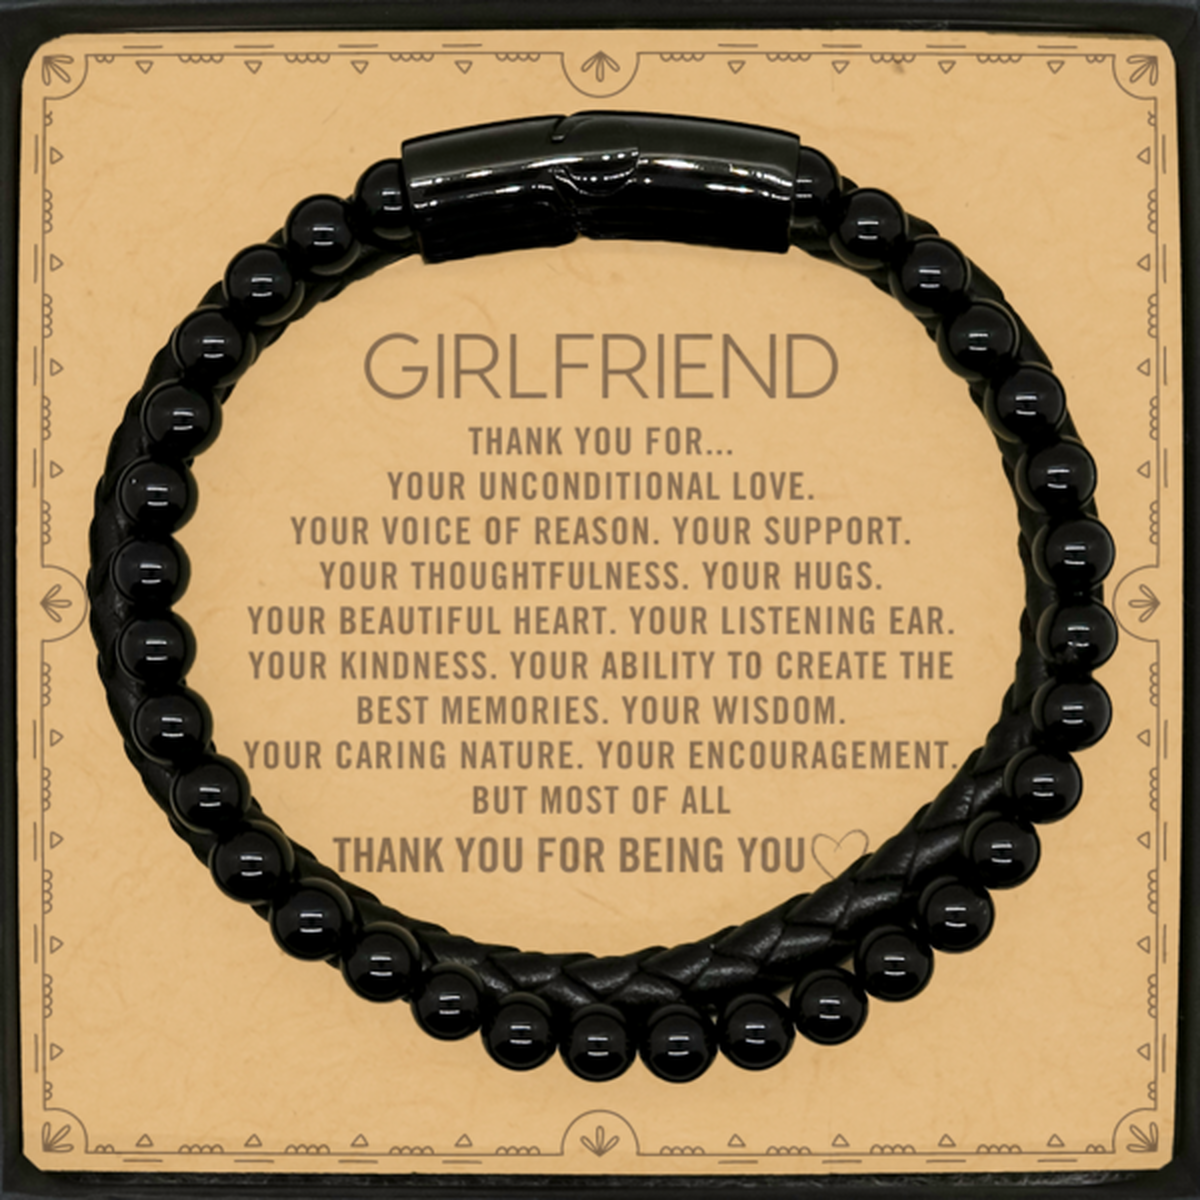 Girlfriend Stone Leather Bracelets Custom, Message Card Gifts For Girlfriend Christmas Graduation Birthday Gifts for Men Women Girlfriend Thank you for Your unconditional love